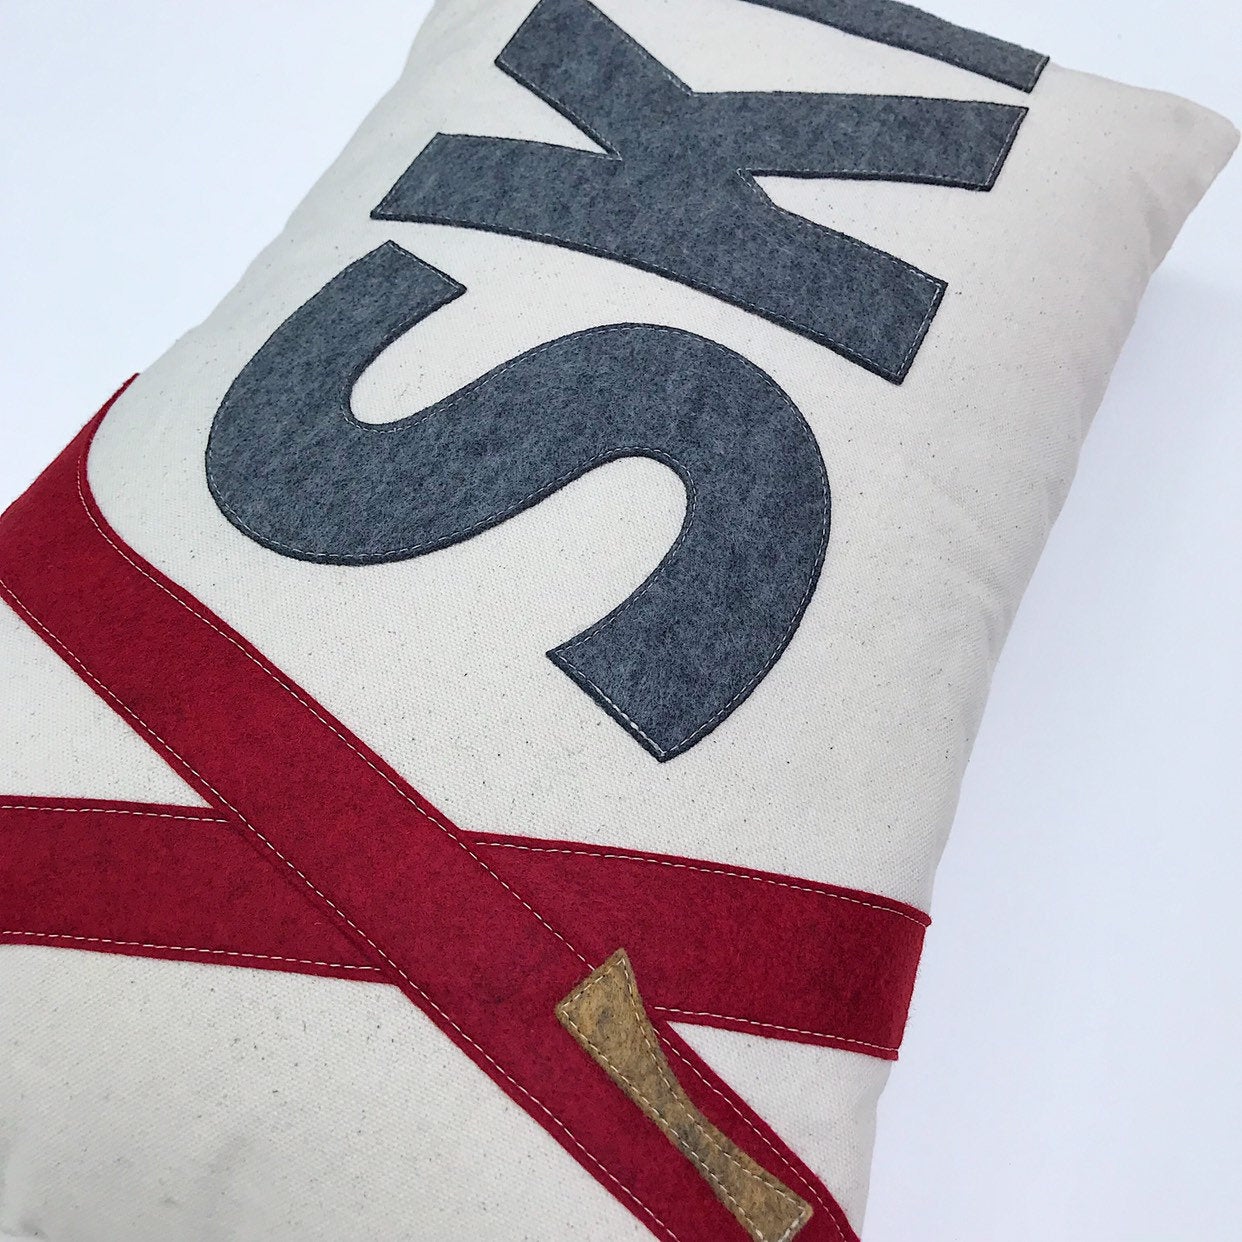 14x21" SKI with red crossed skis lumbar pillow